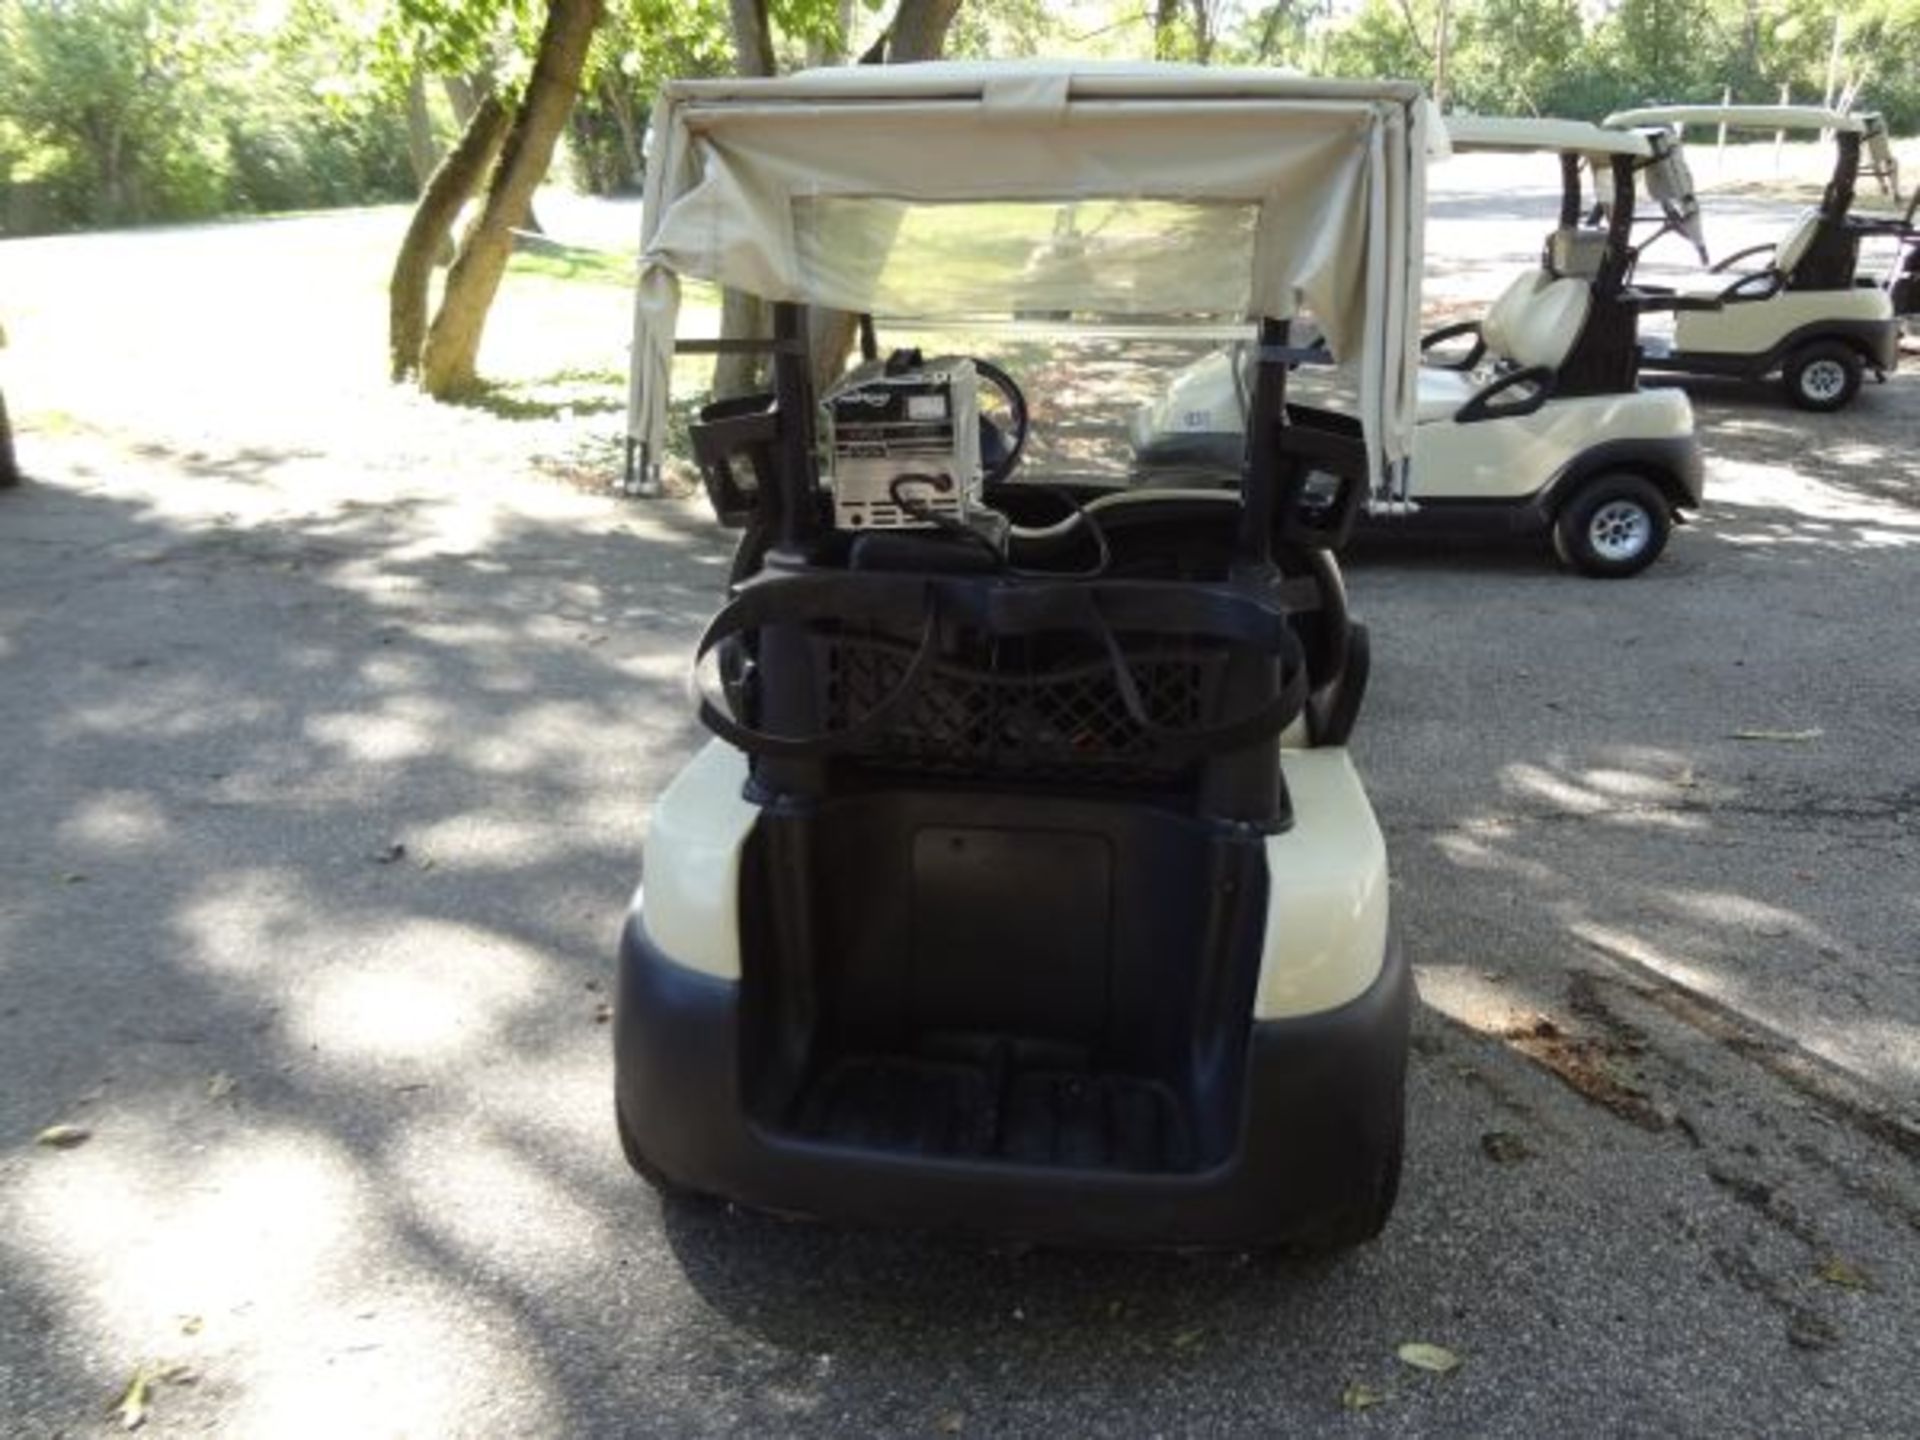 CLUB CAR MODEL CLU PERSONNEL CARRIER / GOLF CART; S/N PH1143-242135, 48 VOLT CHARGER (NEW 2011) - Image 3 of 5